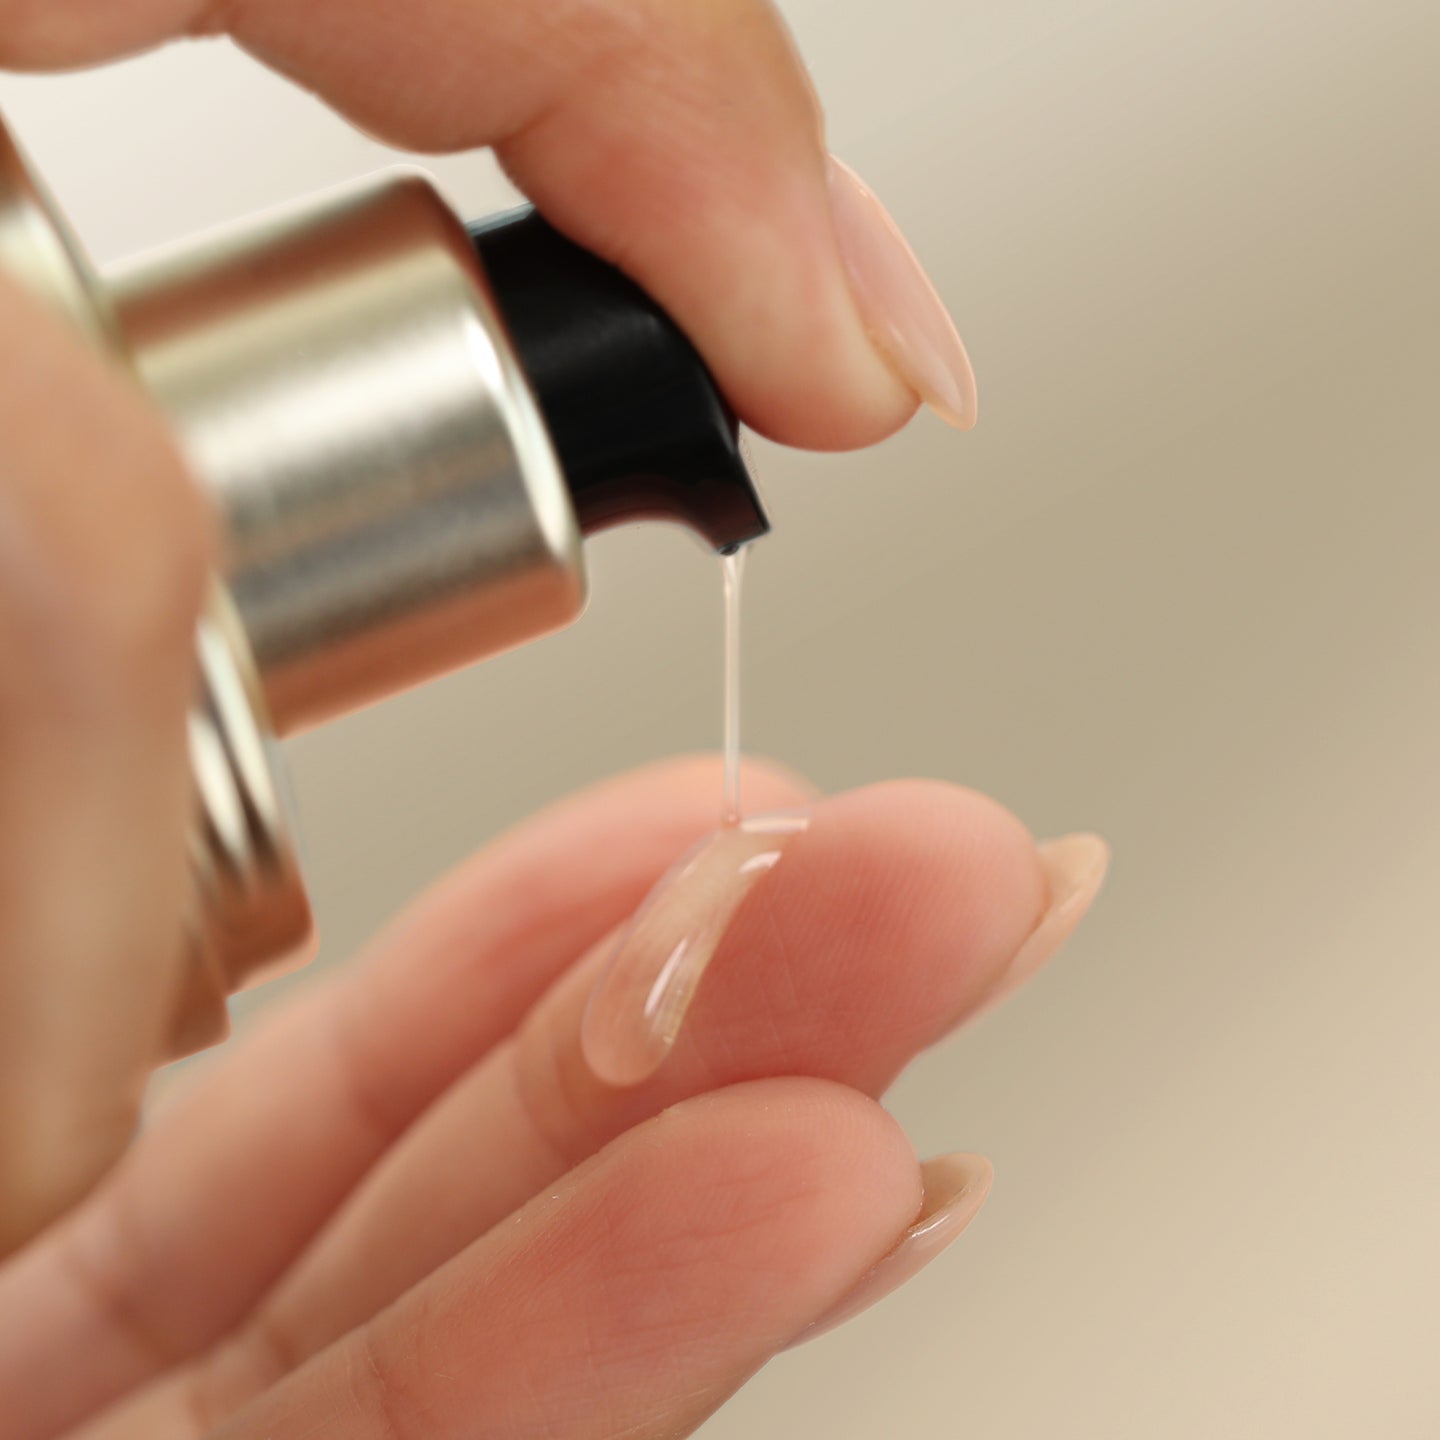 Image showing product applicator putting product on fingers